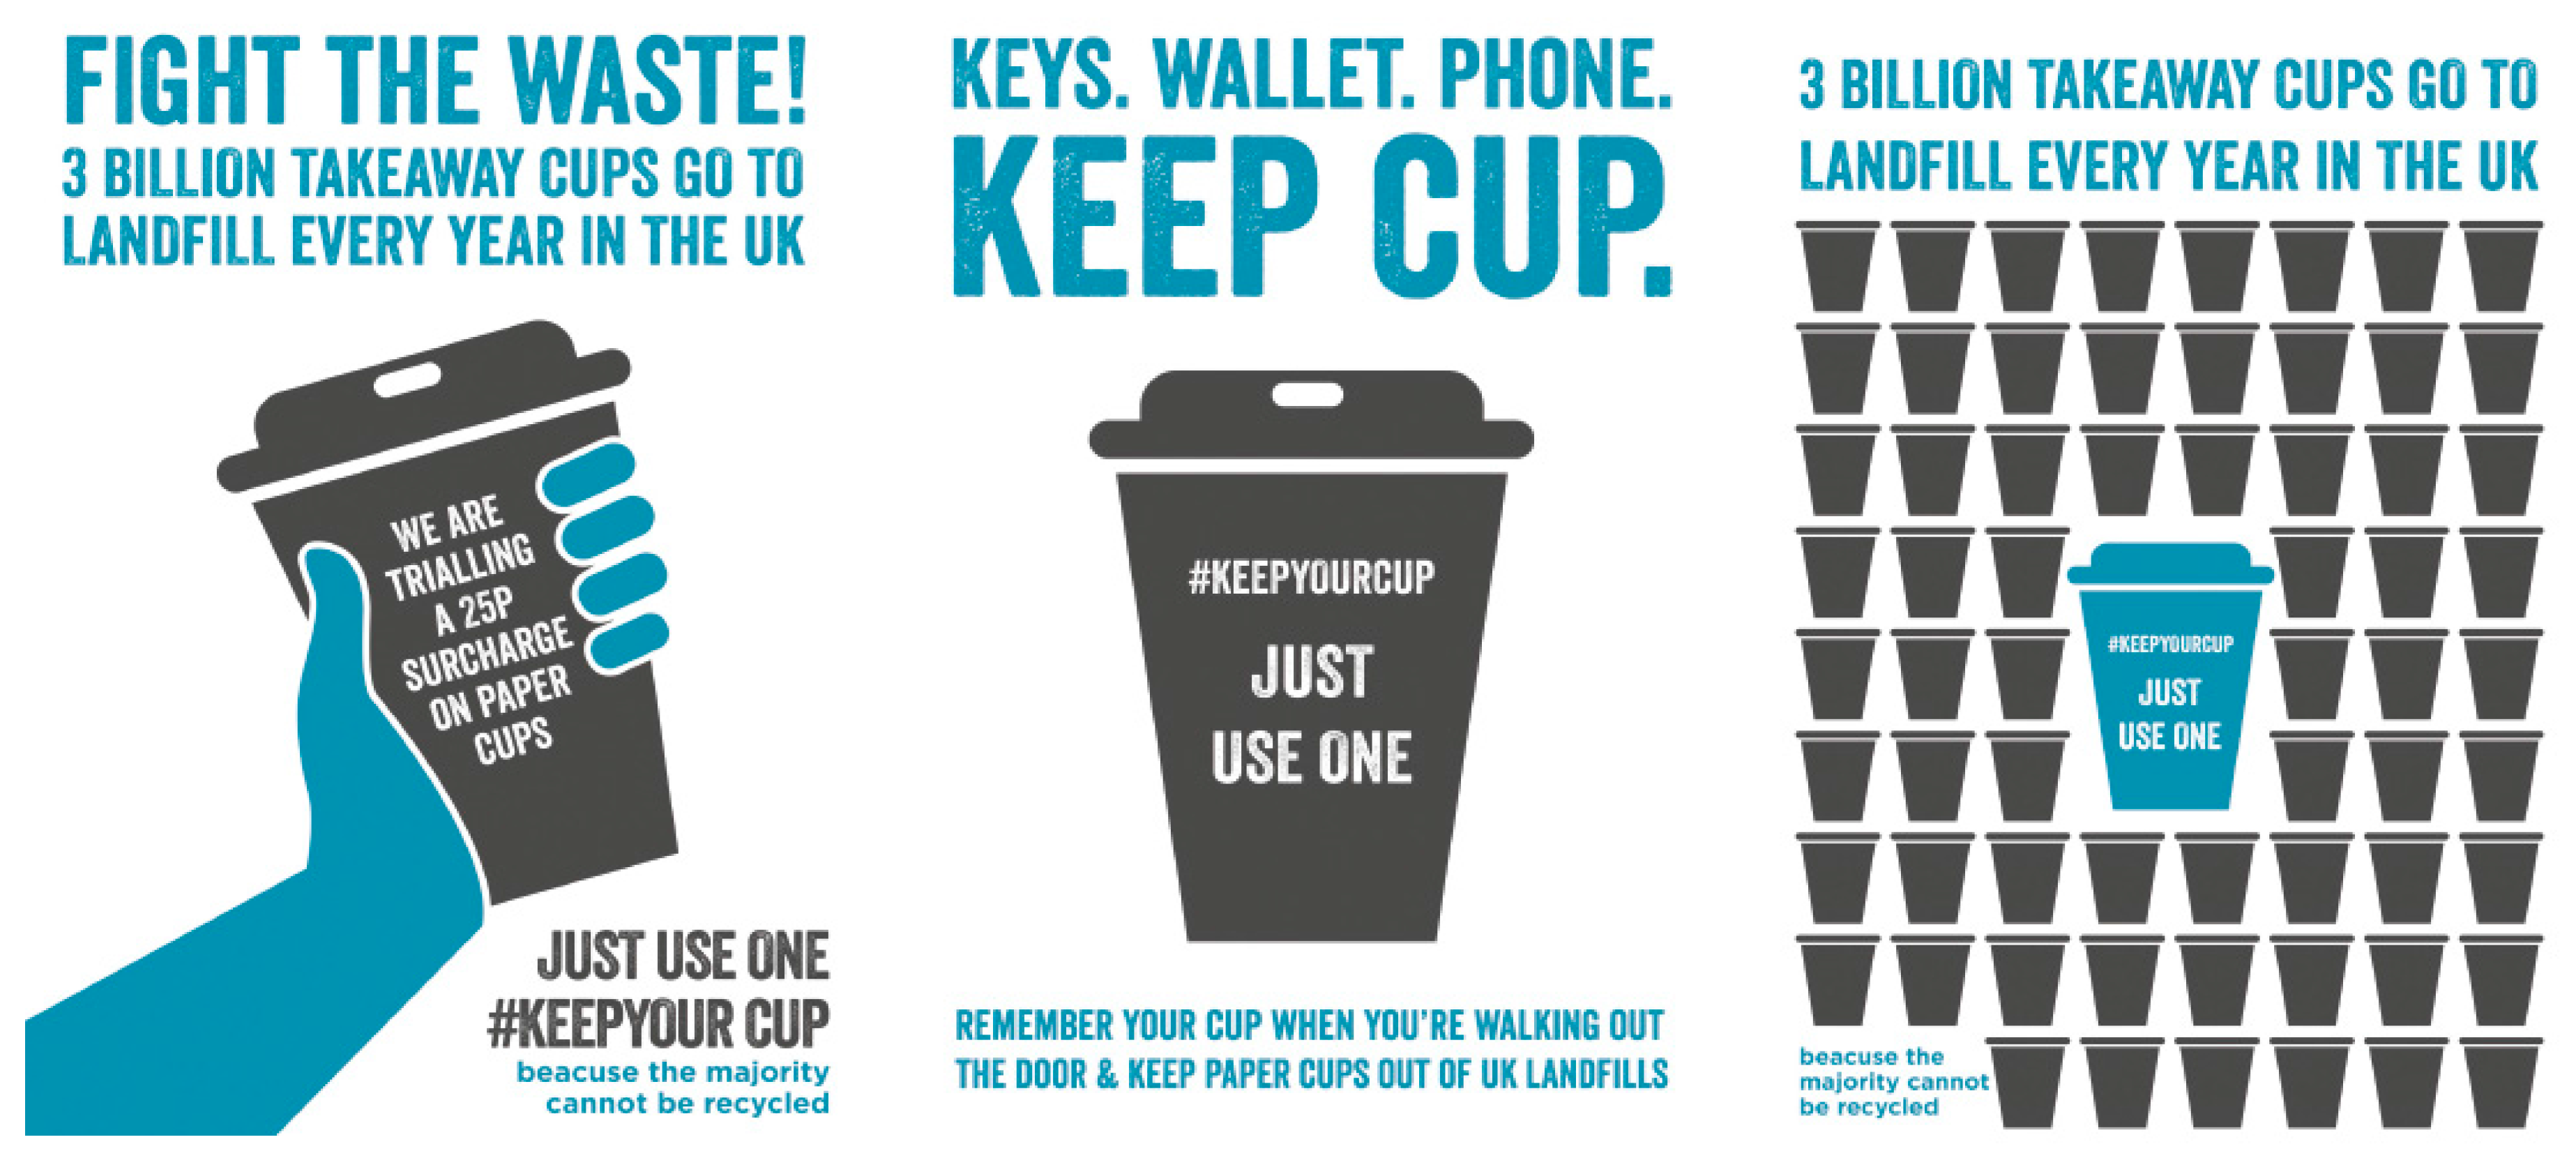 What makes people switch to reusable cups? It's not discounts